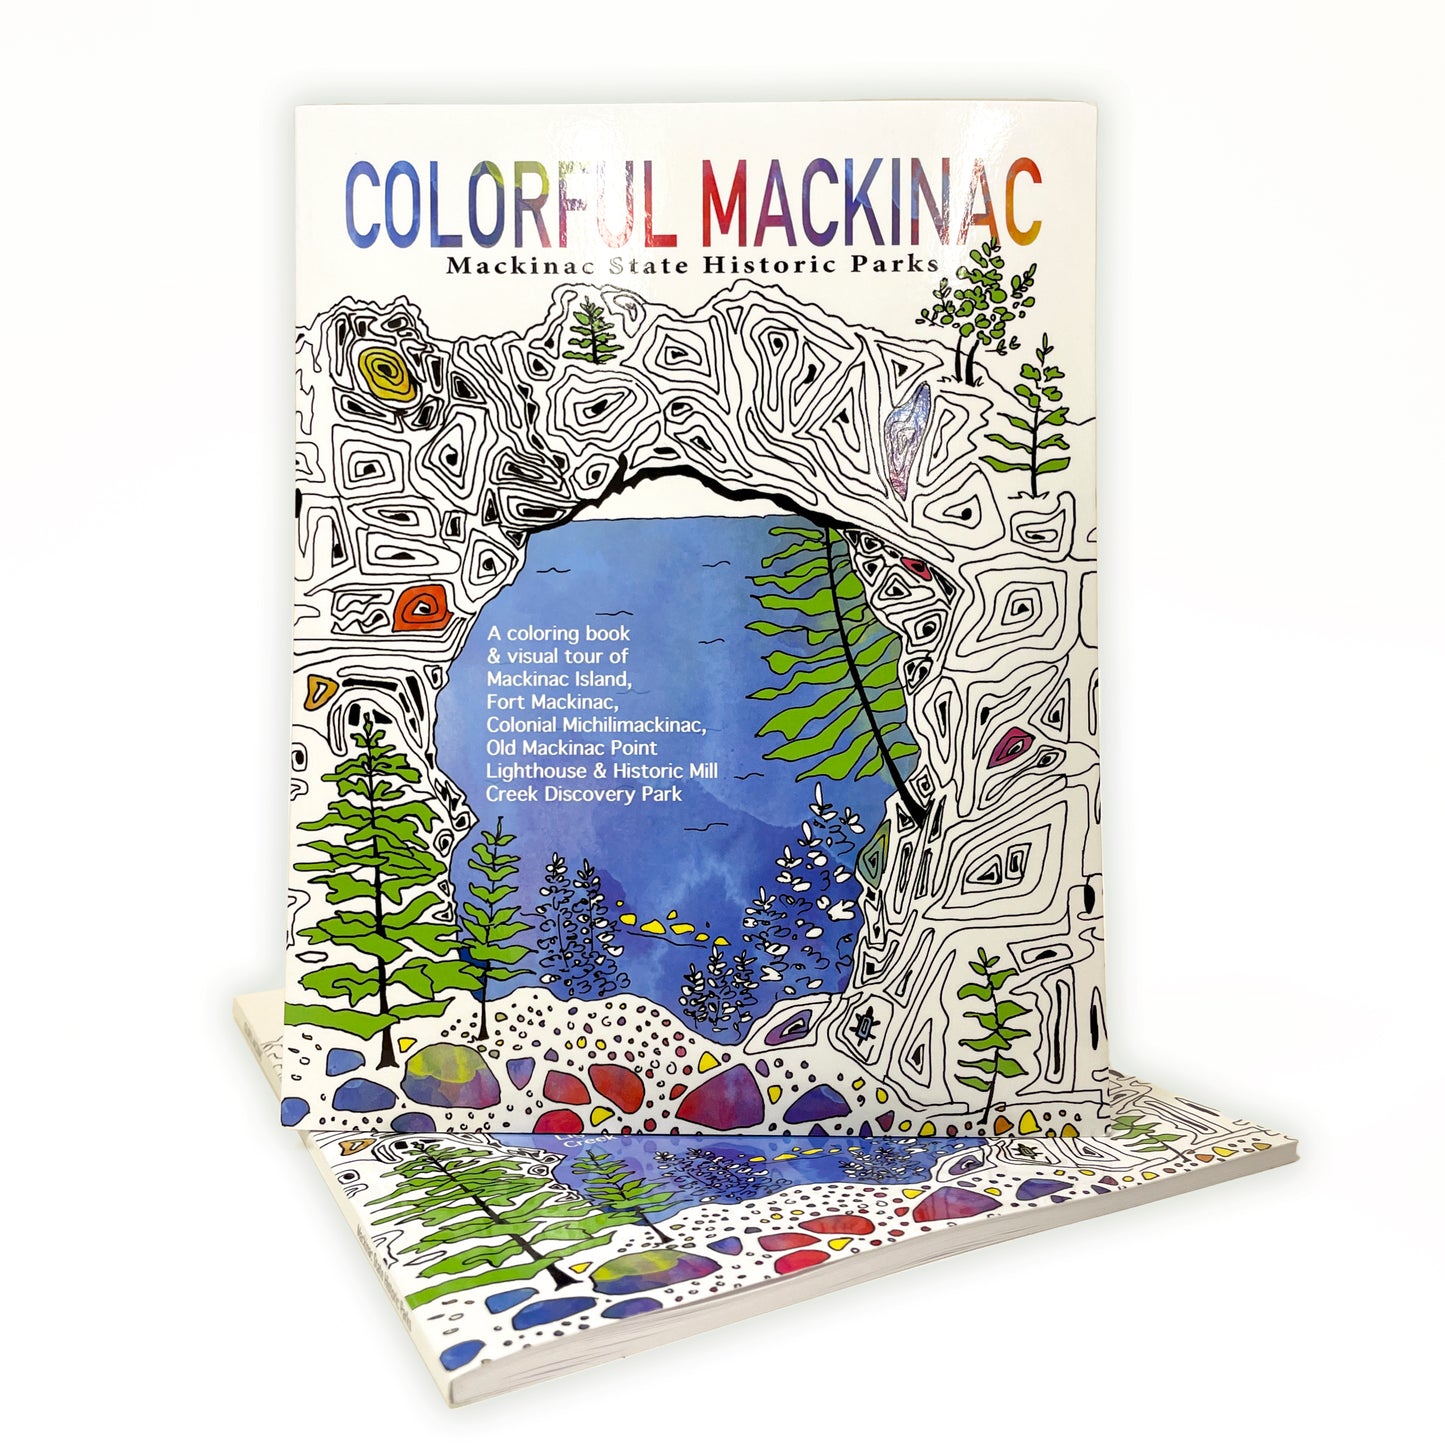 COLORFUL Mackinac, 8 x 10 in. coloring book featuring 30 fun designs to color.  Explore the history and natural wonders of the Mackinac State Historic Parks.  Designs take artists and readers on a visual tour of Mackinac Island, Fort Mackinac, Colonial Michilimackinac, Old Mission Point Lighthouse and Historic Mill Creek Discovery Park. 